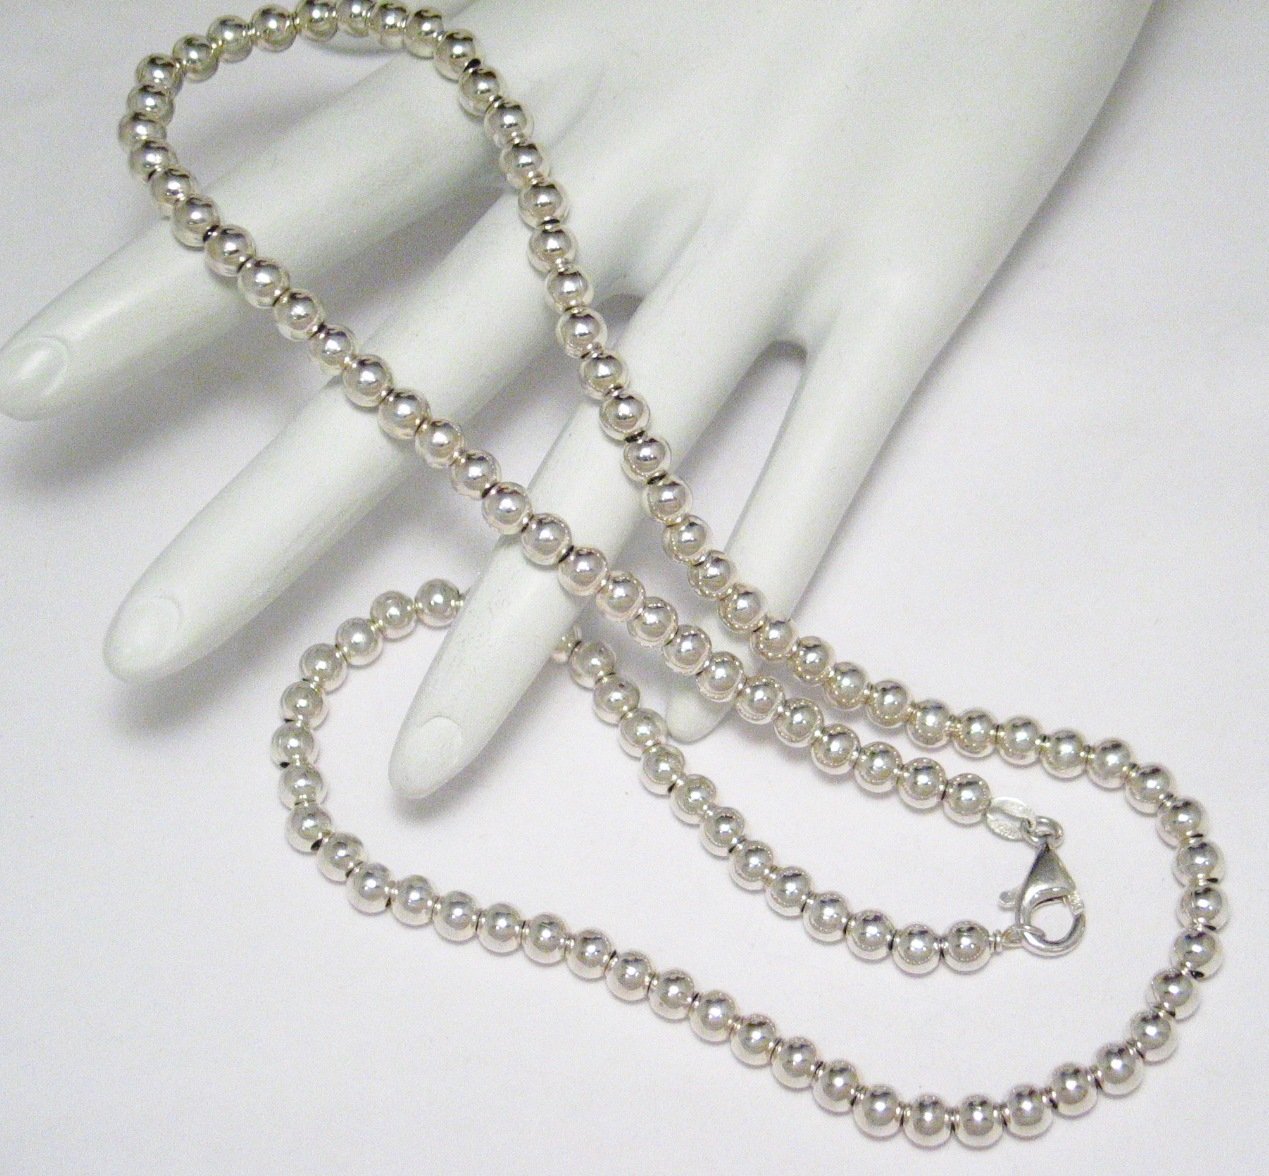 Low Cost Used Jewelry | Quality Made 20.25" Sterling Silver 5mm Bead Ball Chain Necklace 